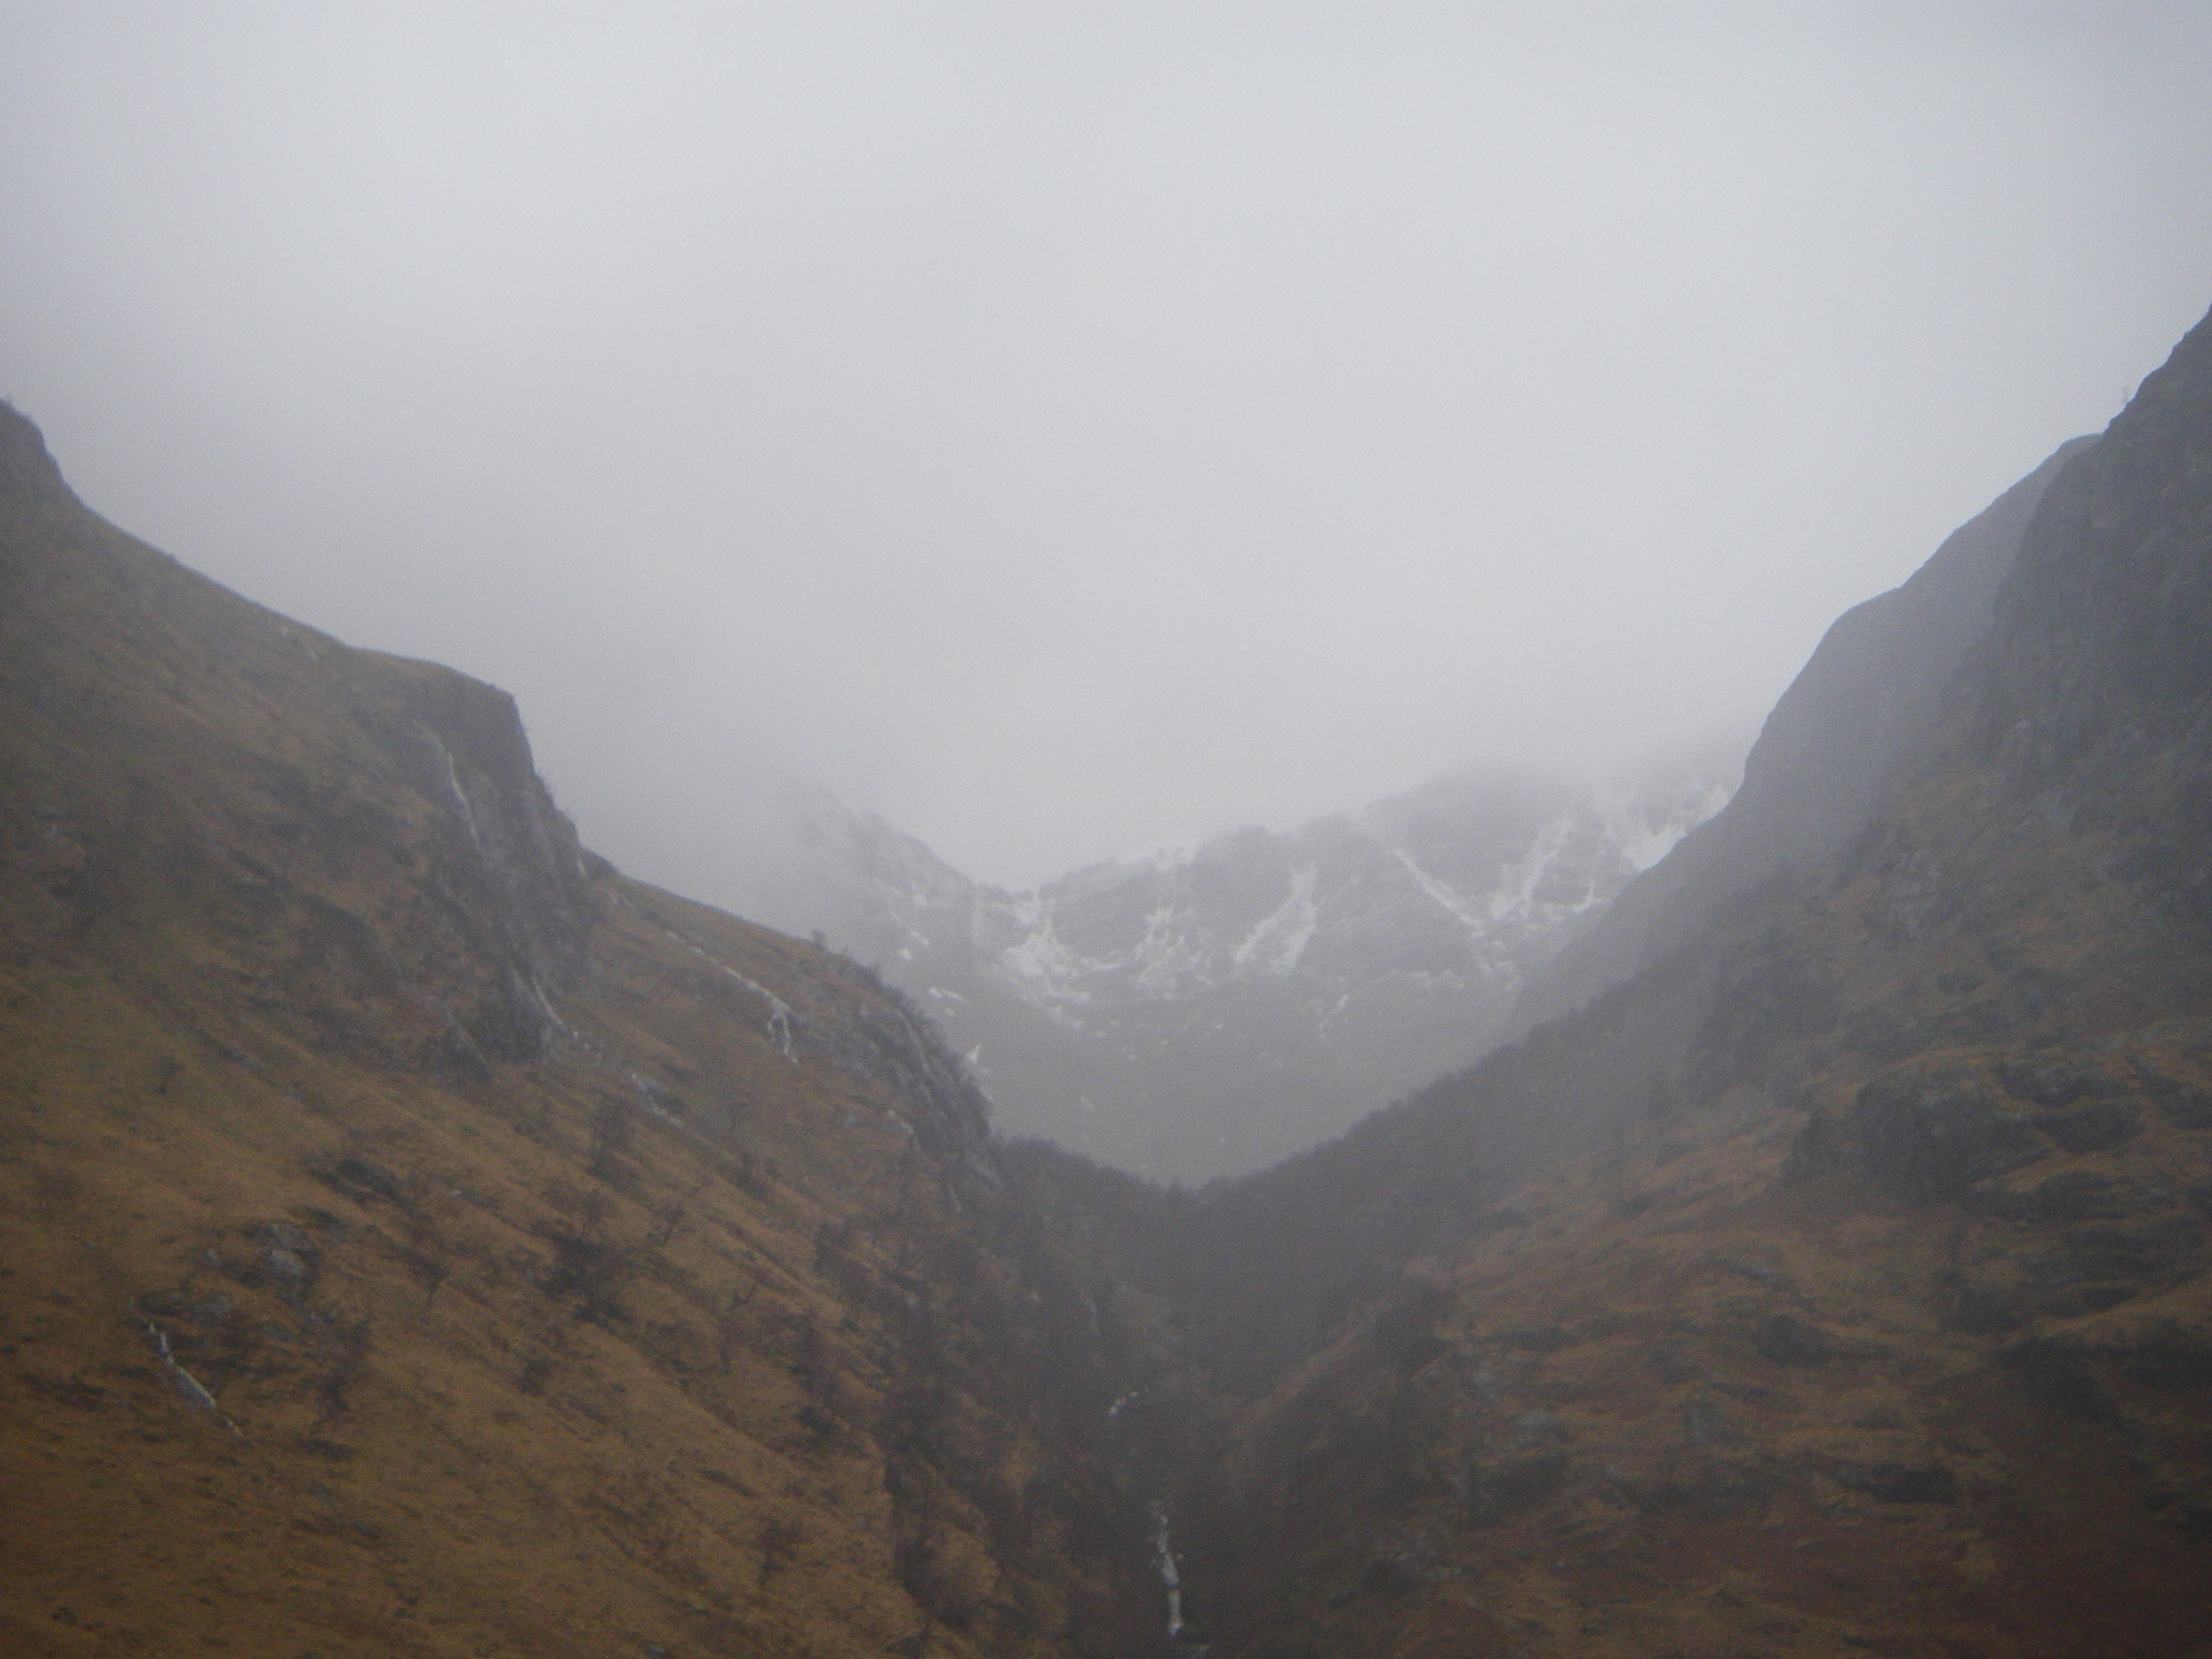 Looking into Coire Gabhail